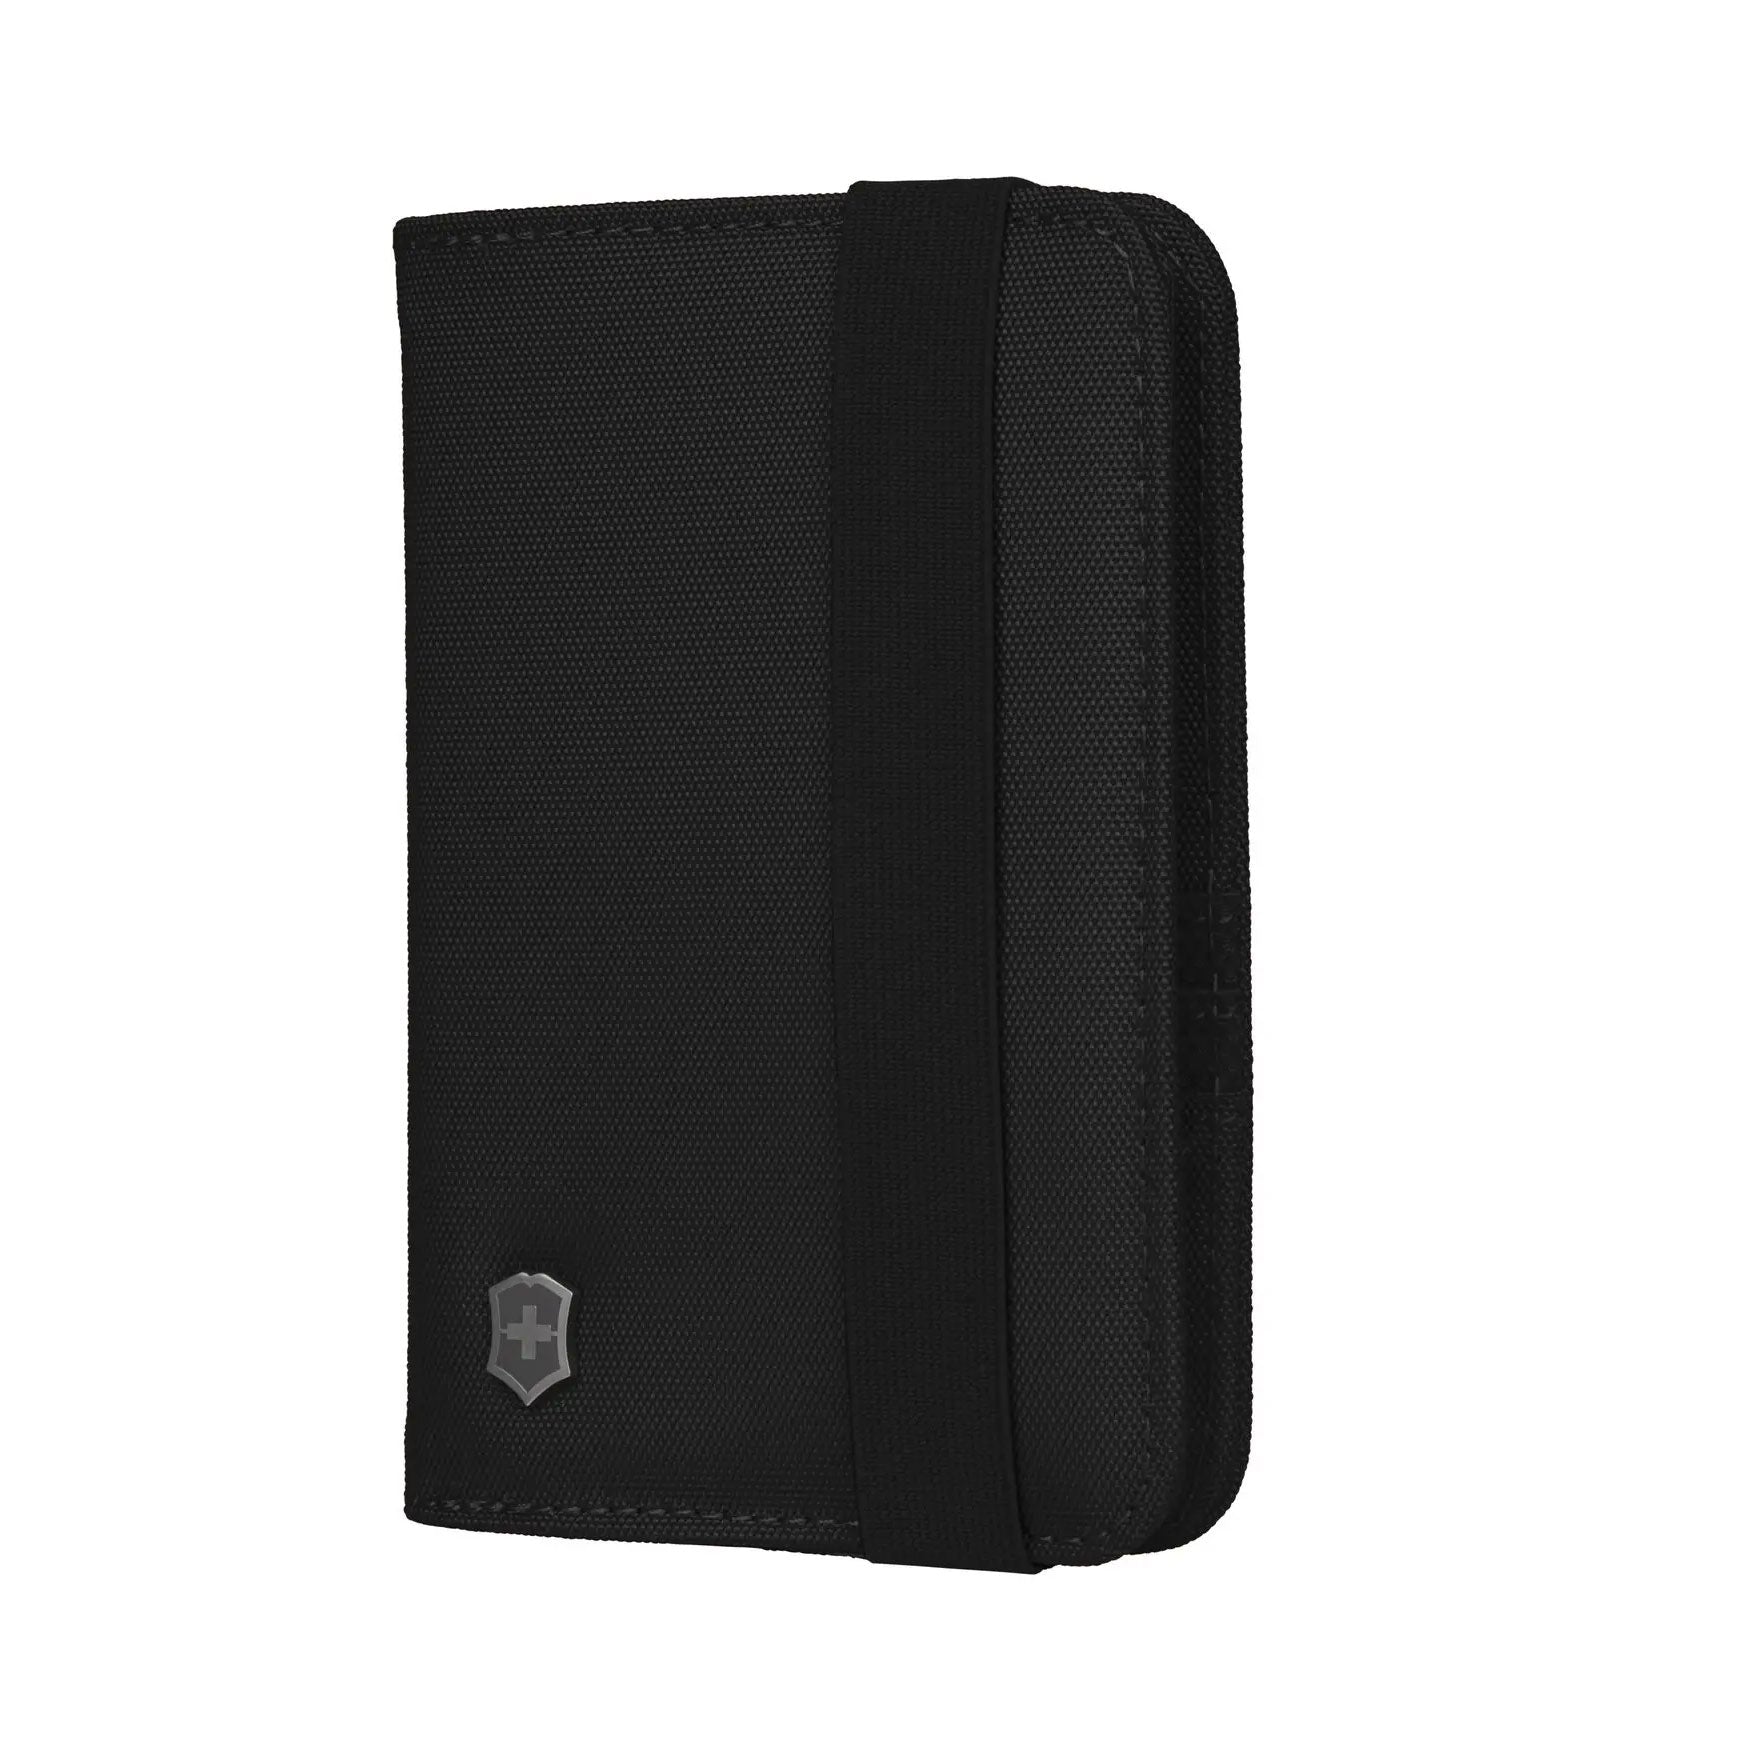 Victorinox Swiss Army Travel Accessories 5.0 Passport Holder with RIFD Protection